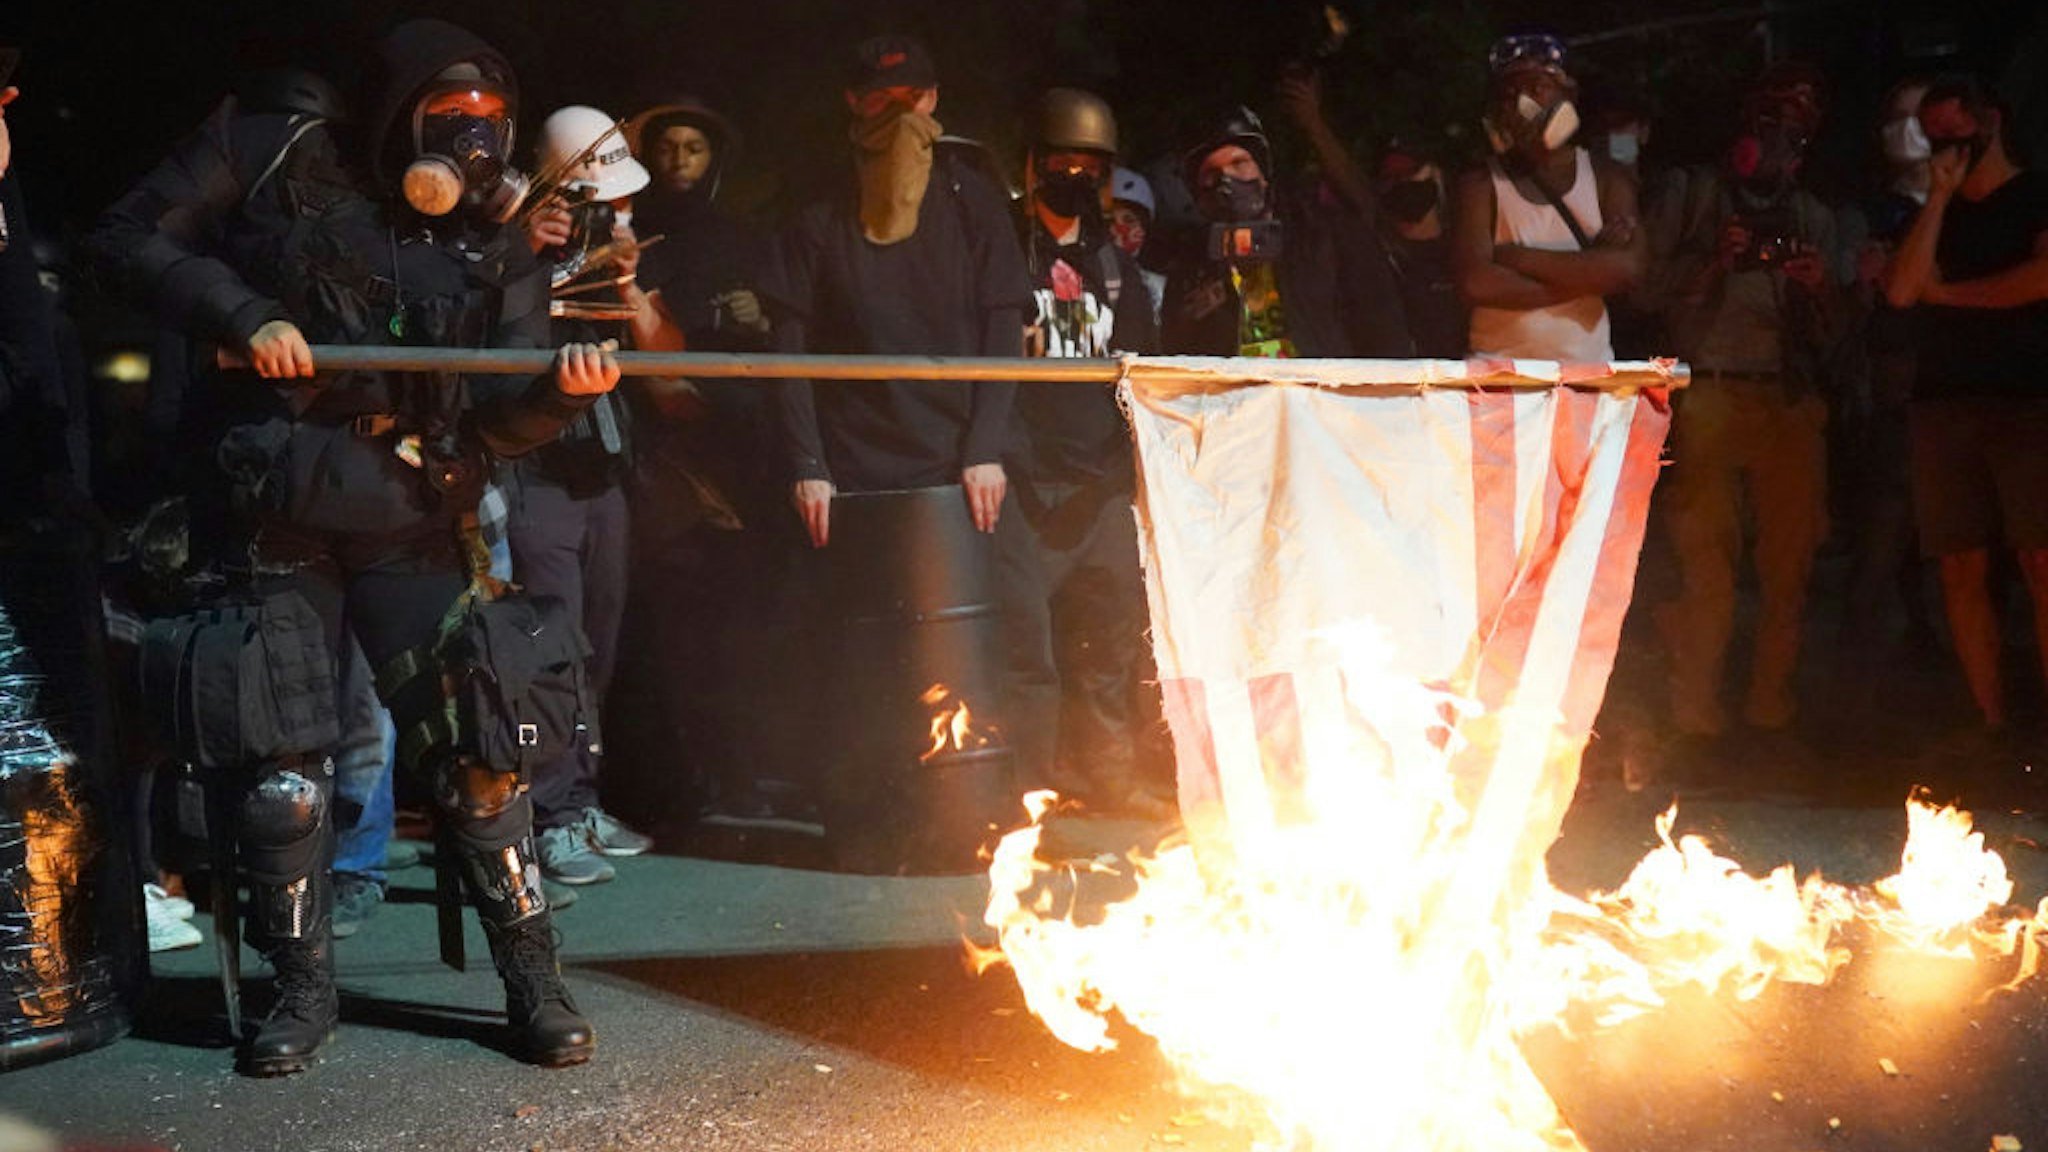 PORTLAND, OR - AUGUST 1: A protester burns an American flag in front of the Mark O. Hatfield U.S. Courthouse in the early morning on August 1, 2020 in Portland, Oregon. Friday was the second night in a row without police intervention, following weeks of clashes between federal officers and protesters in Portland. (Photo by Nathan Howard/Getty Images)